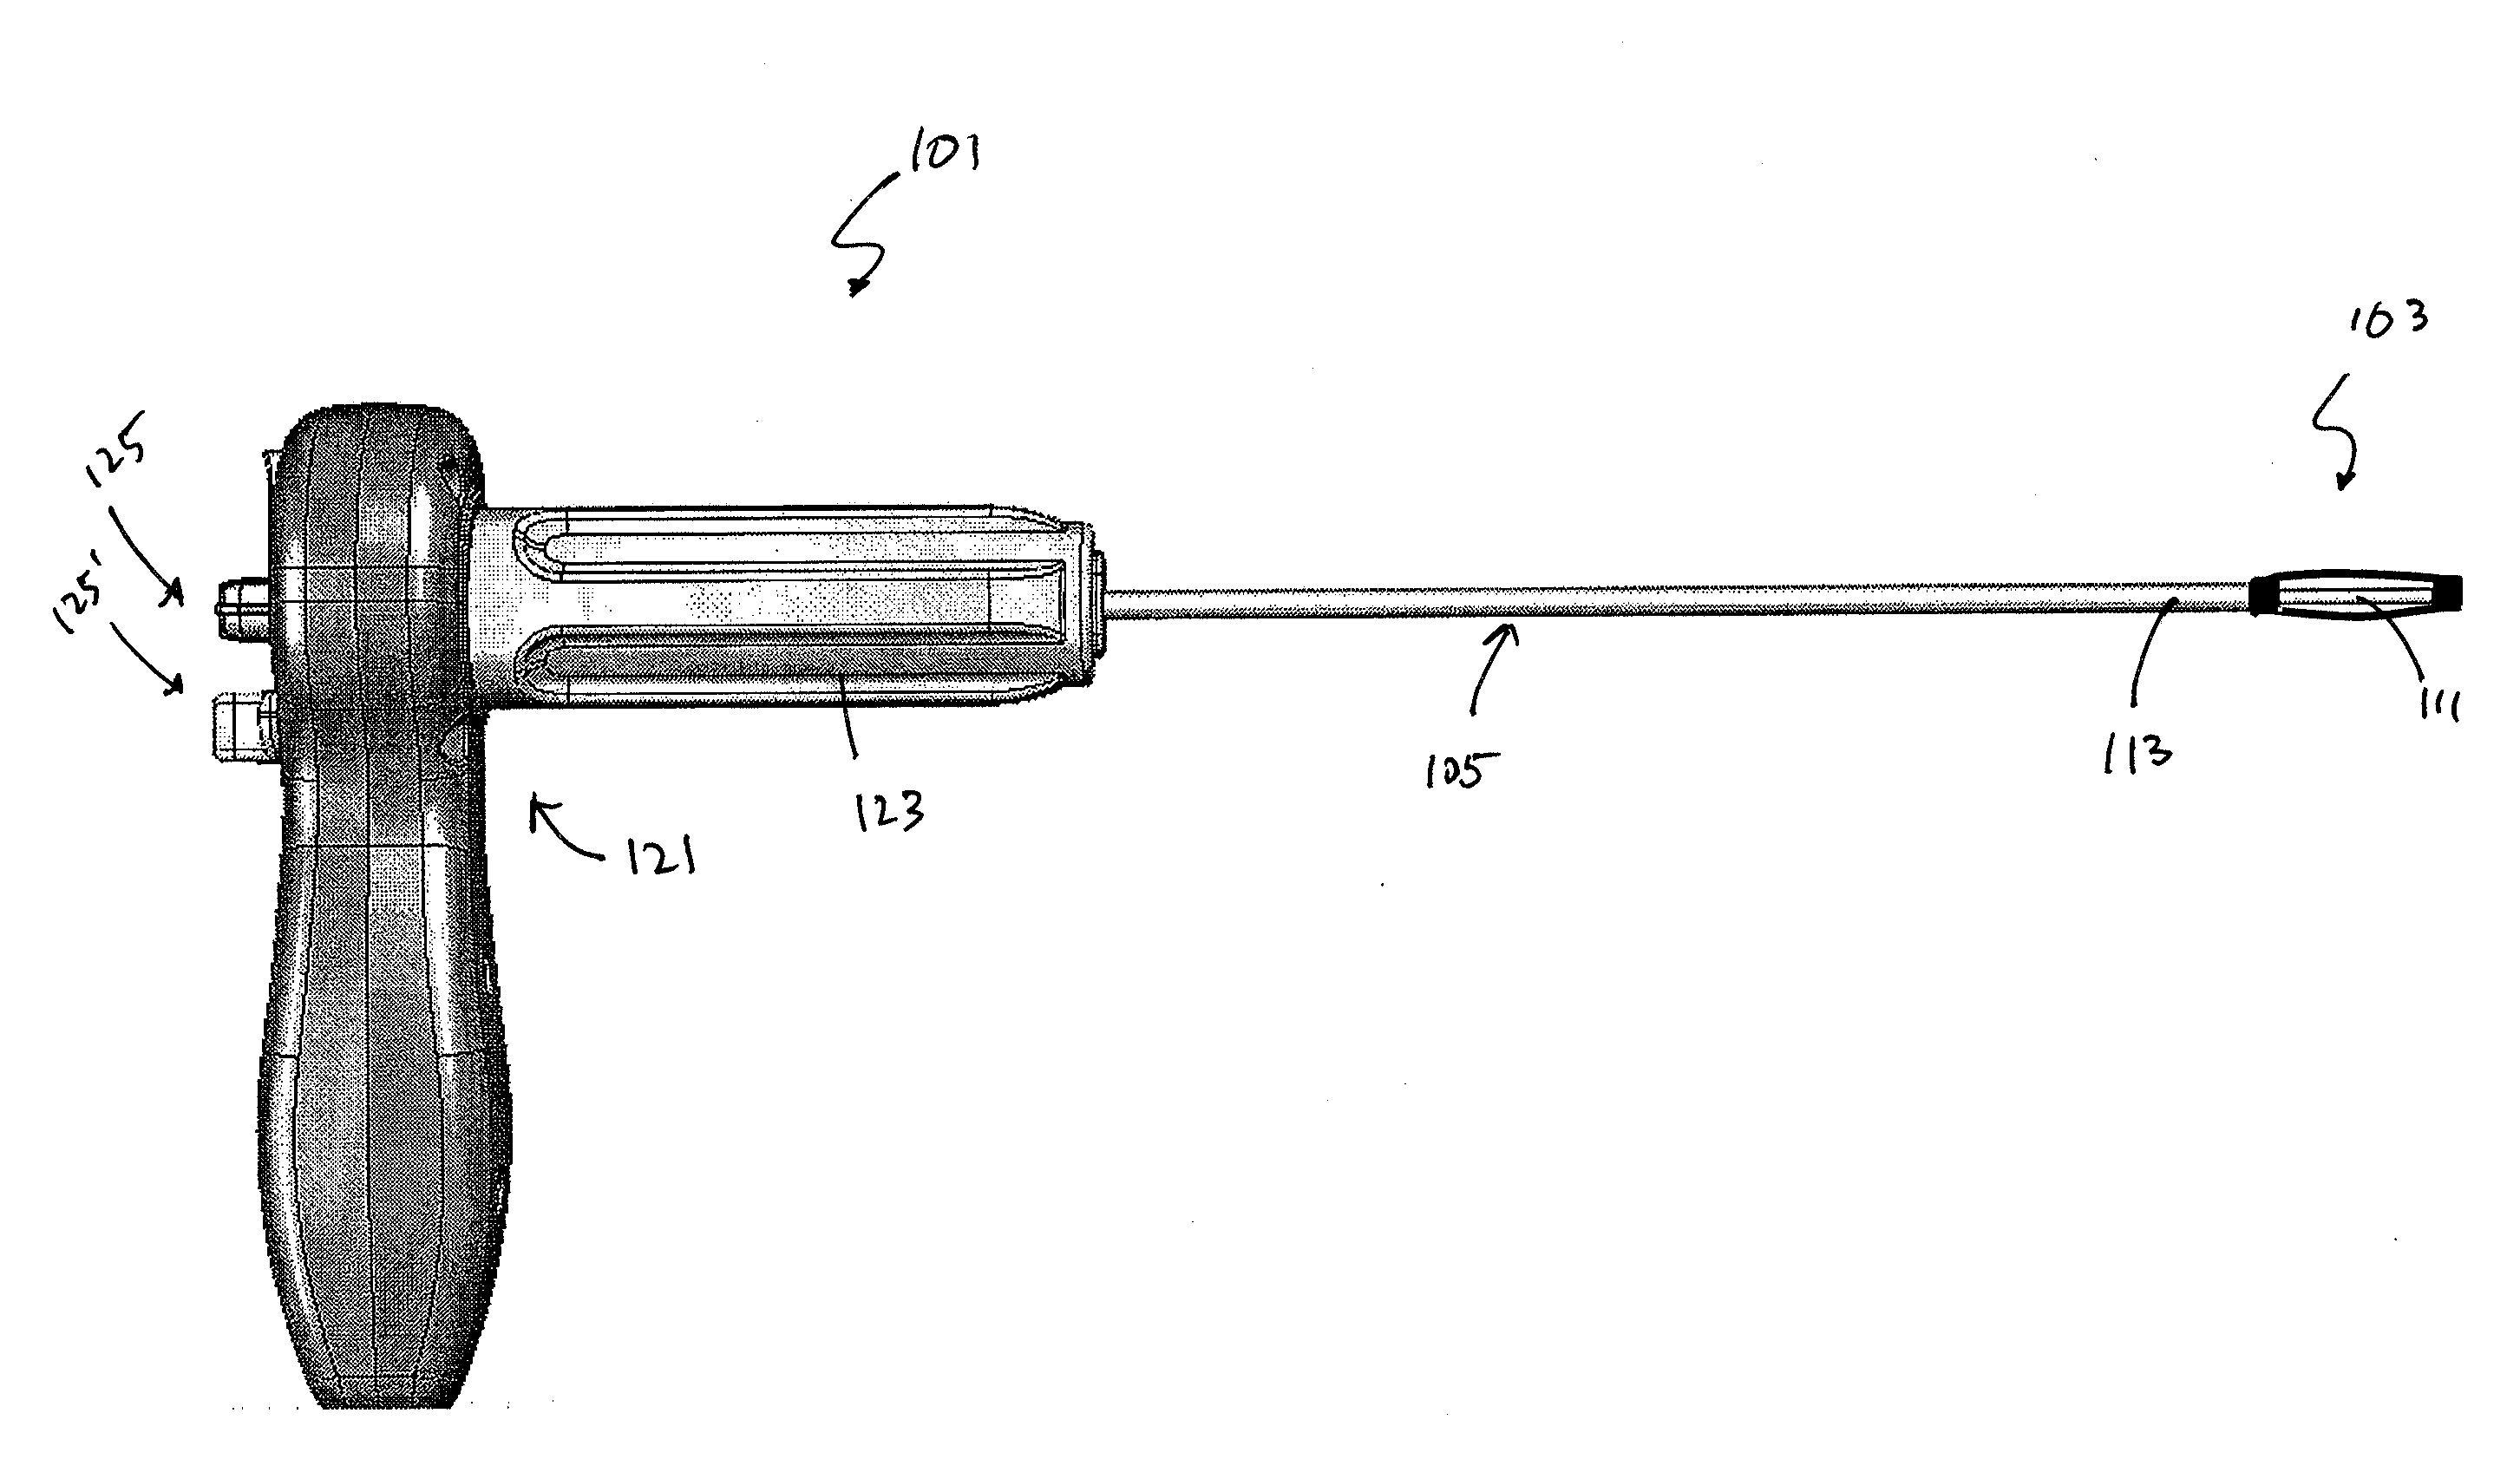 Controlled deployment handles for bone stabilization devices